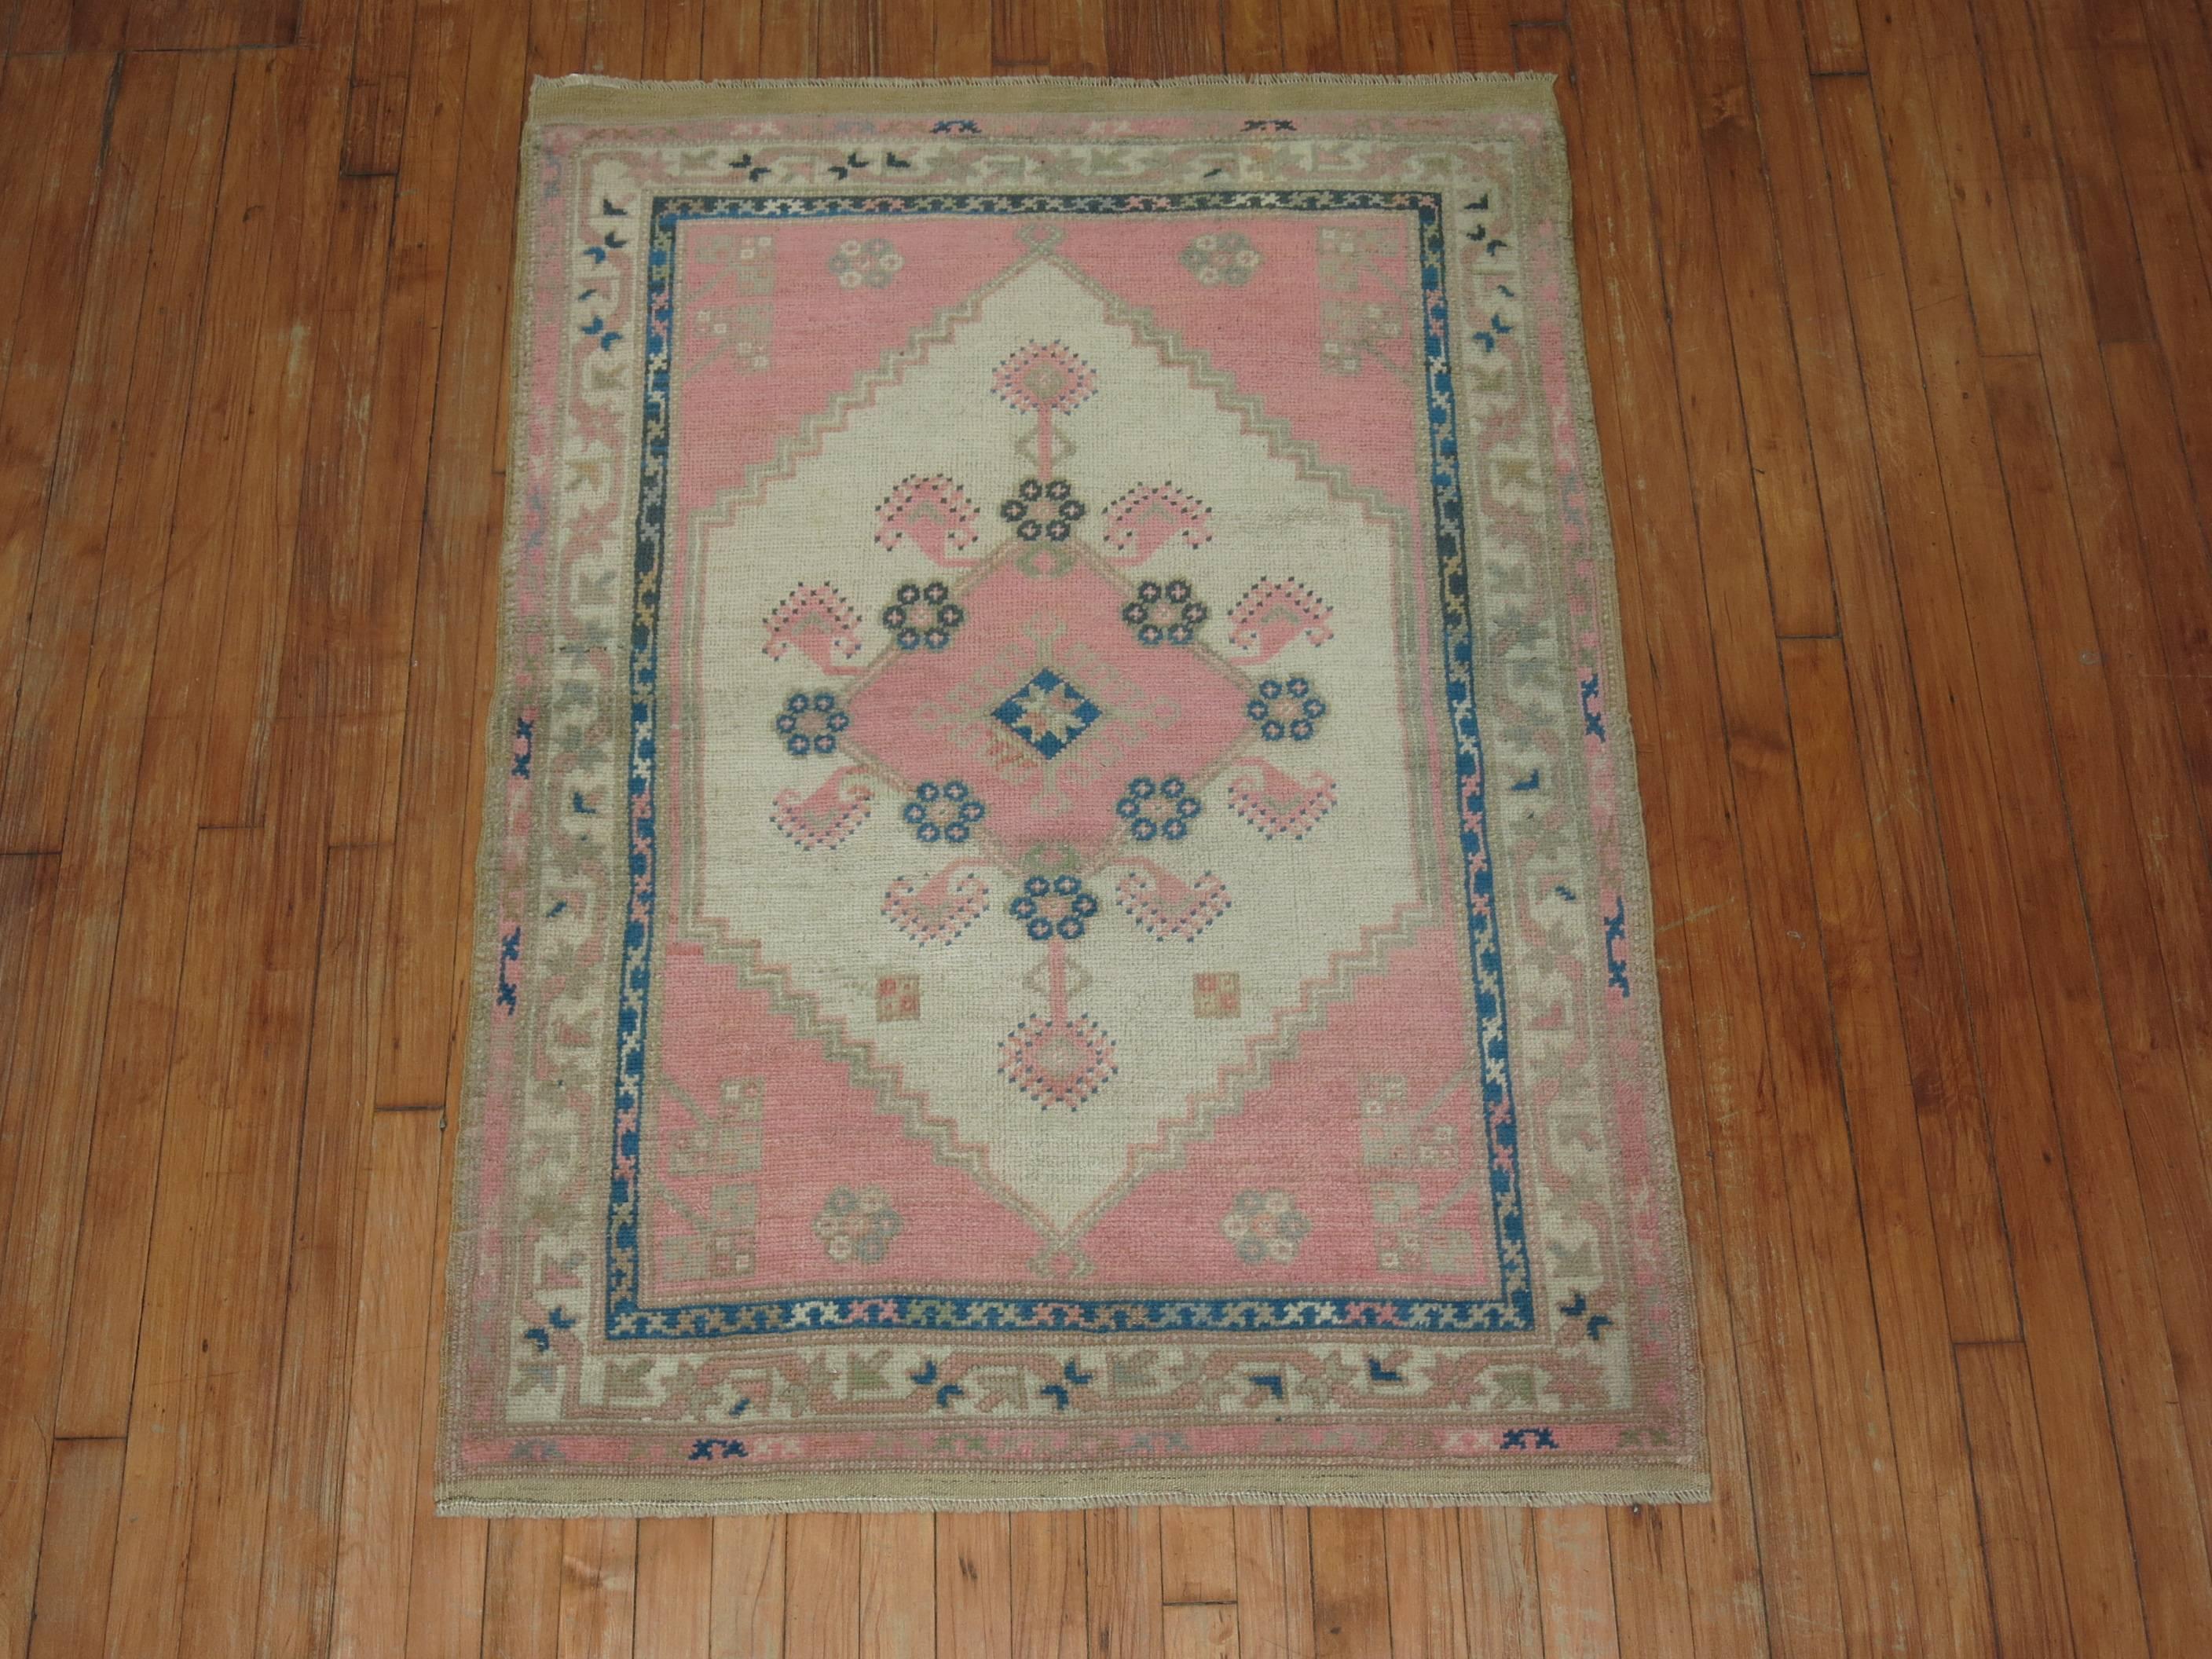 Mid-20th century Turkish Anatolian rug featuring a bubble gum pink color we seldom find. Pretty Blueish green accents with an ivory medallion.

Measures: 3'3